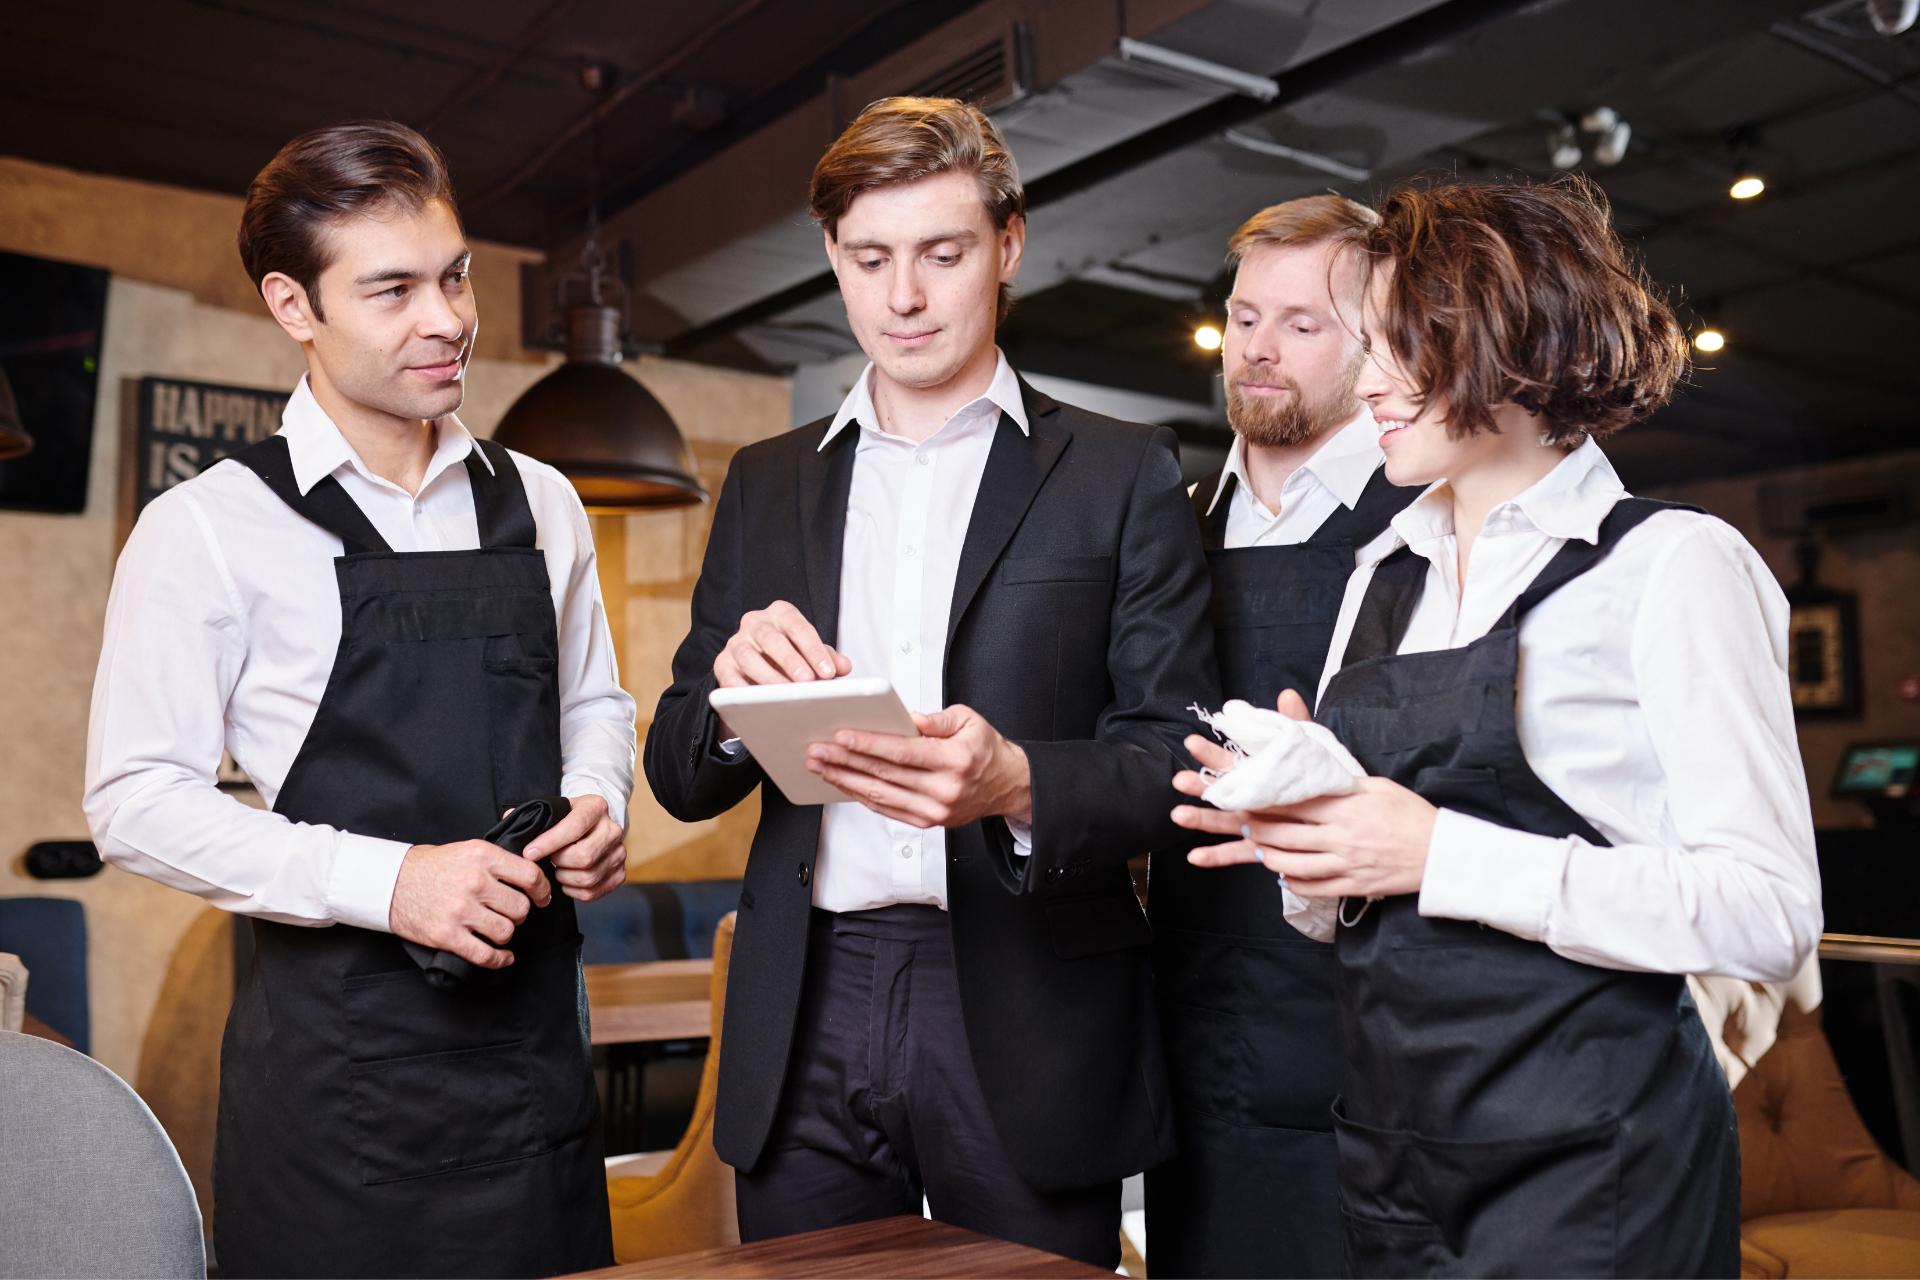 Restaurant manager talking to waiters and directing the service